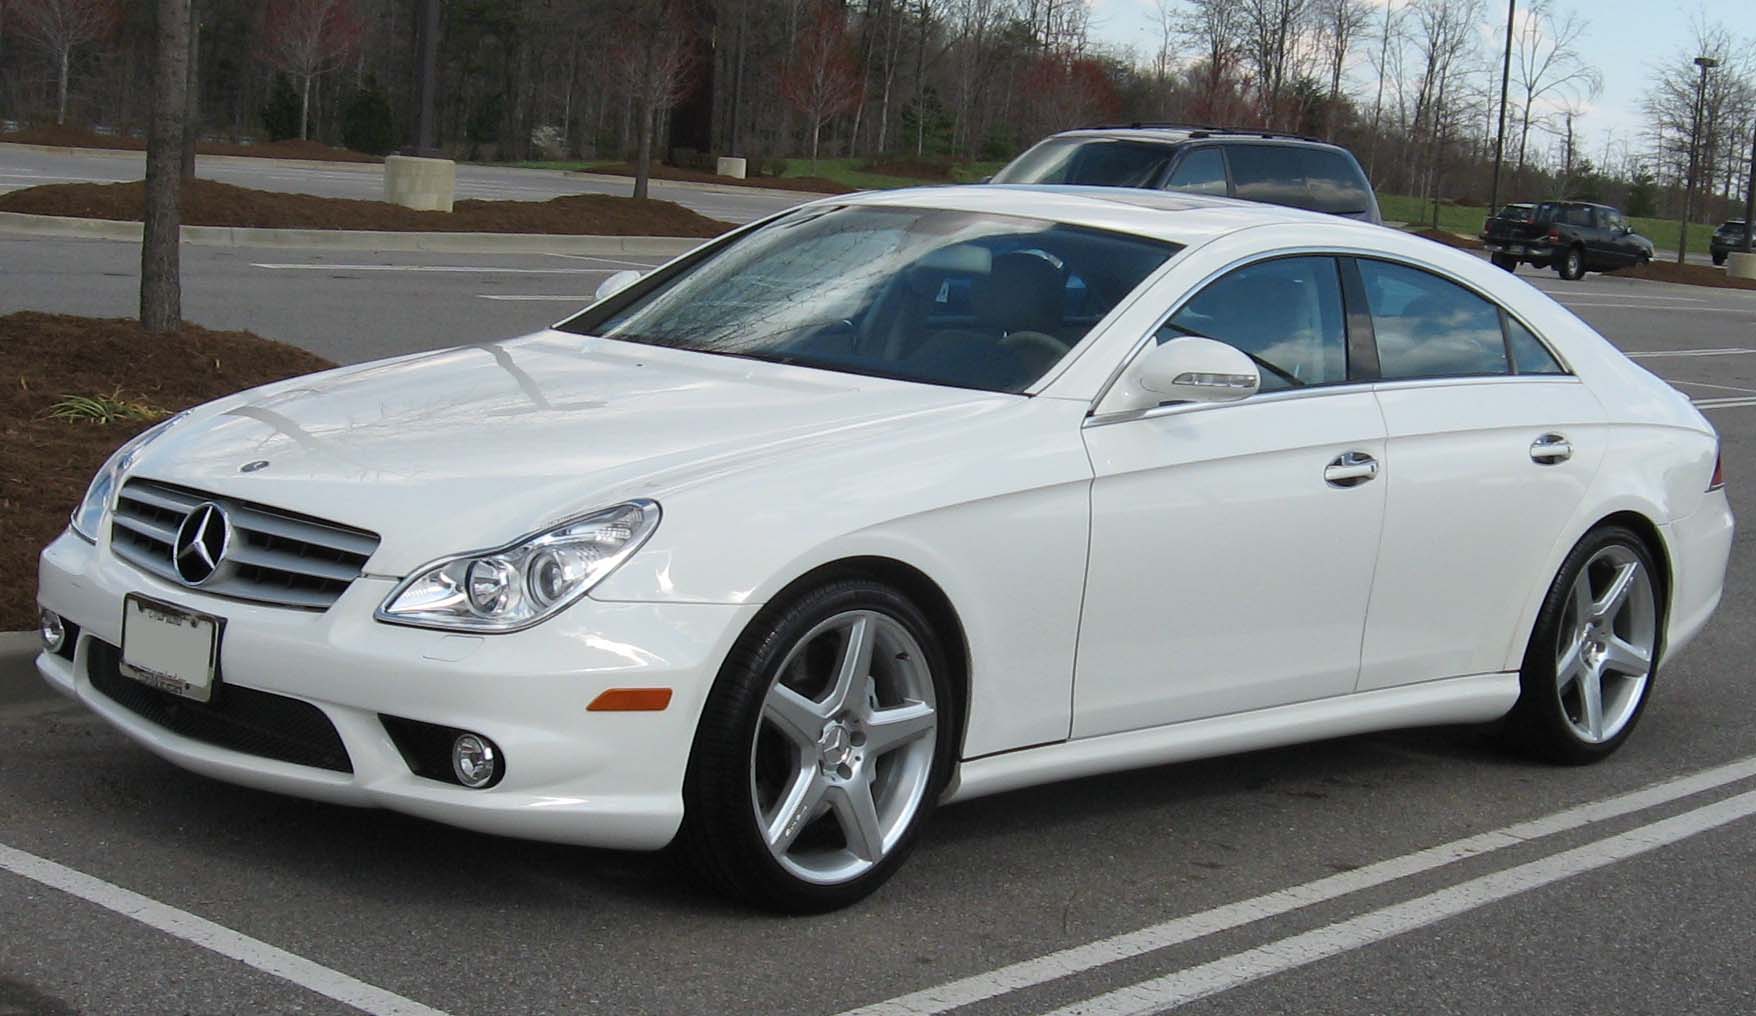 File:2006-Mercedes-Benz-CLS55-AMG-2.jpg - Wikimedia Commons